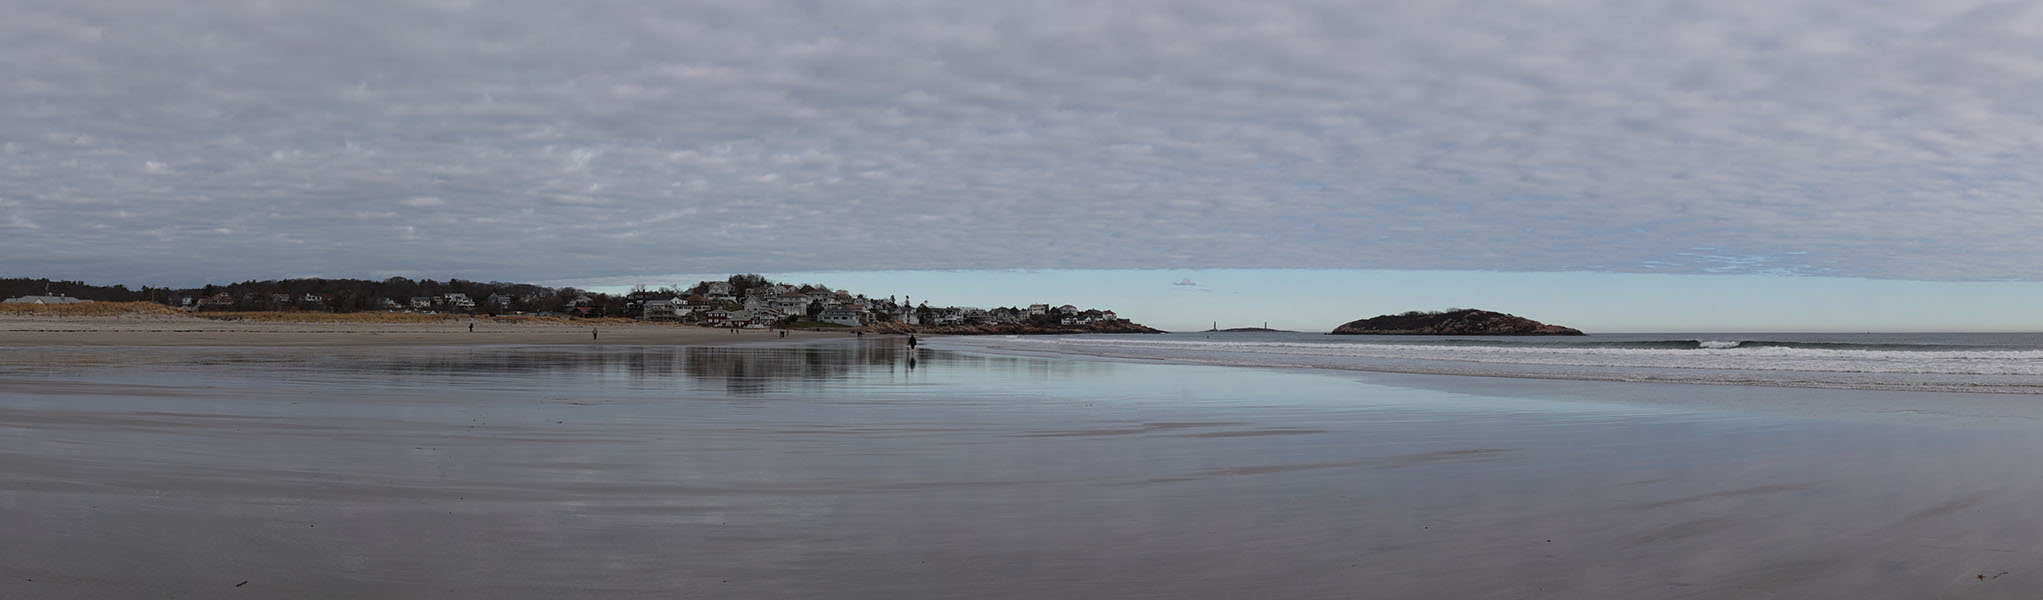 Wide Panoramic Photo of Beach and Islands.